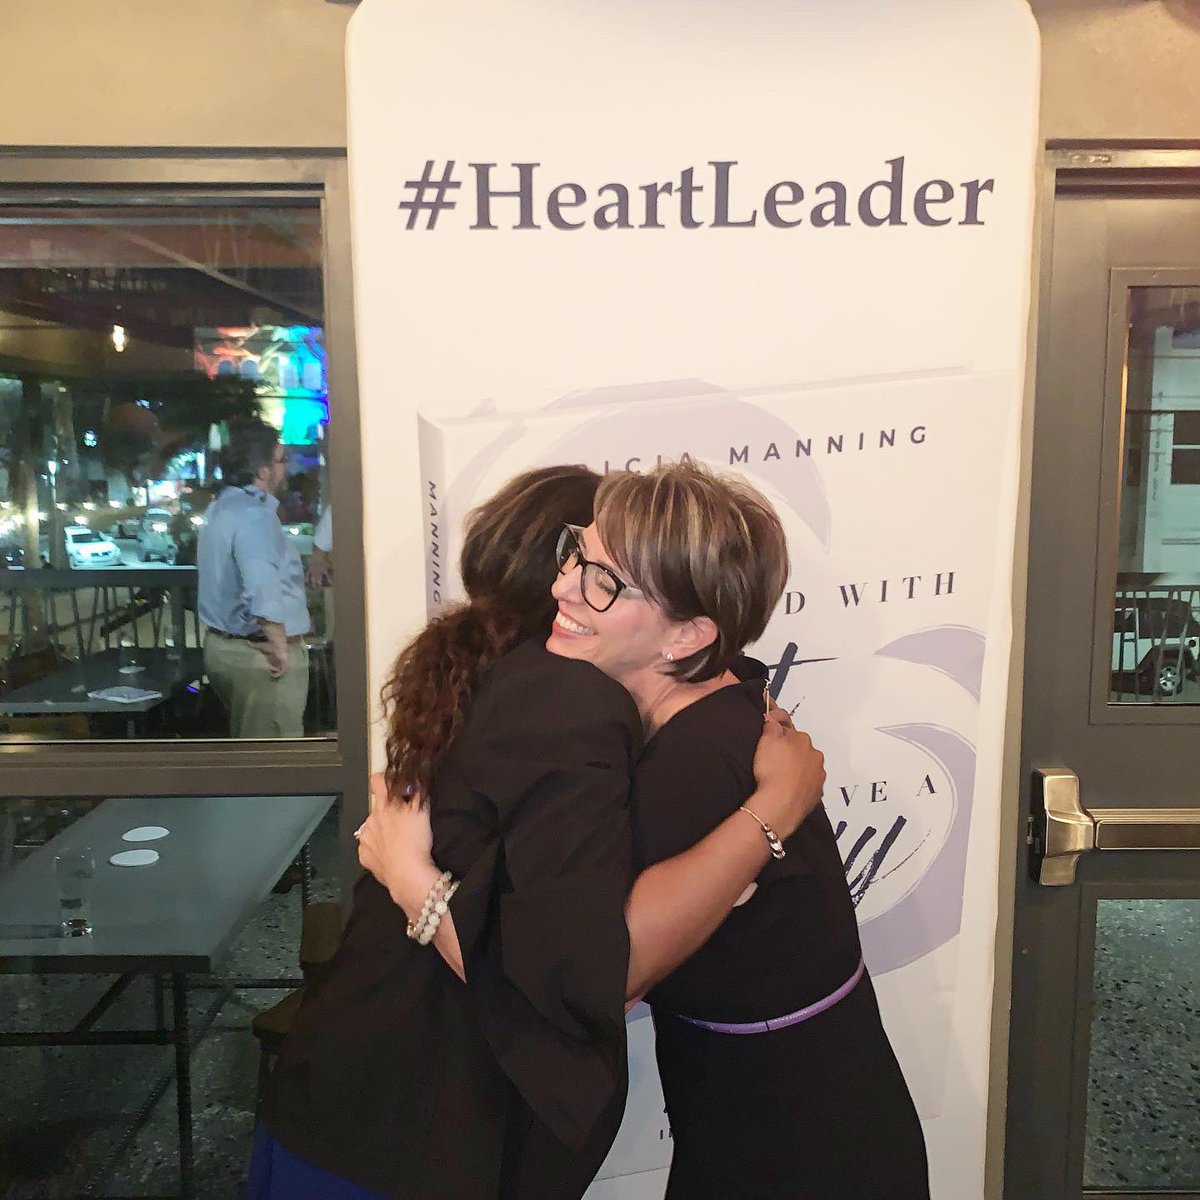 Congratulations to fellow @CASAStPete Board Member, Tricia Manning on the launch of her new book, Lead with Heart and Leave a Legacy. She has positively impacted so many people including me. It’s worth the read and is on Amazon. #heartleader